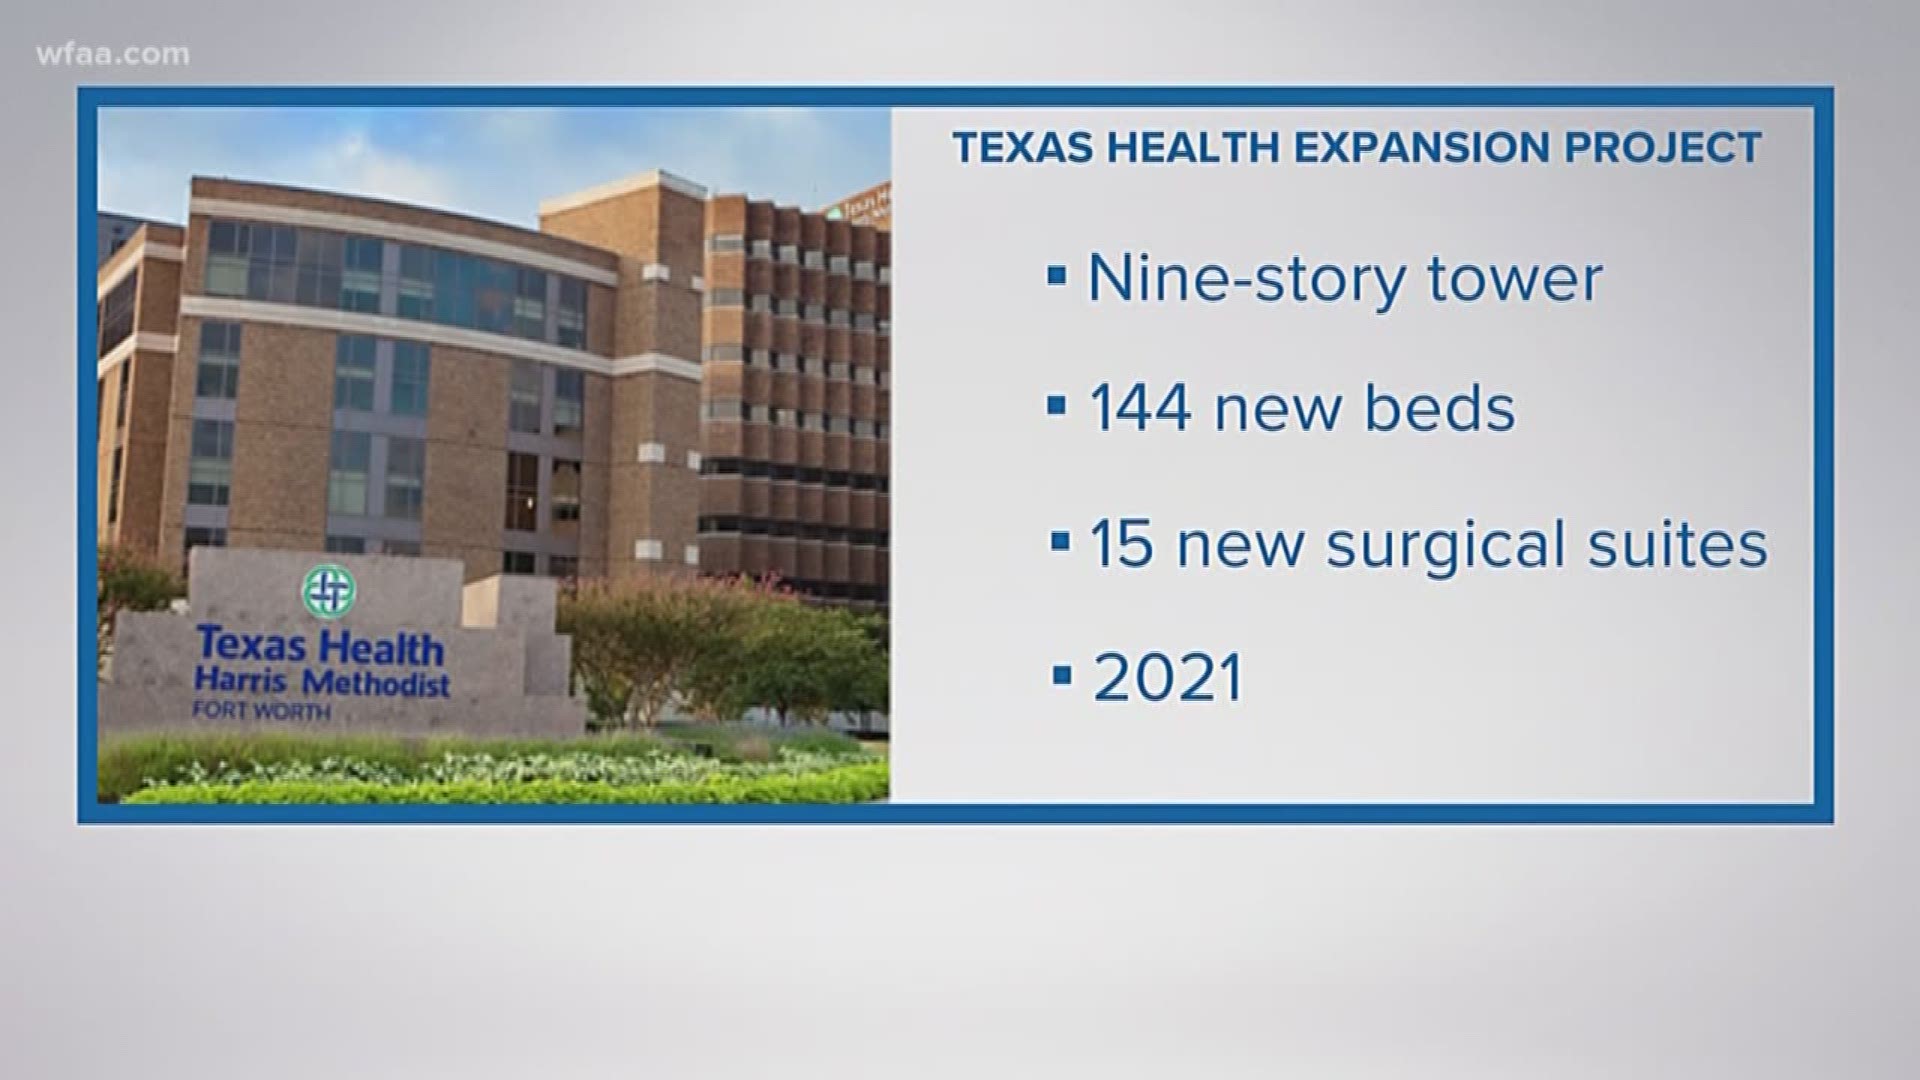 Texas Health Resources to invest $300 million in Fort Worth hospital expansion